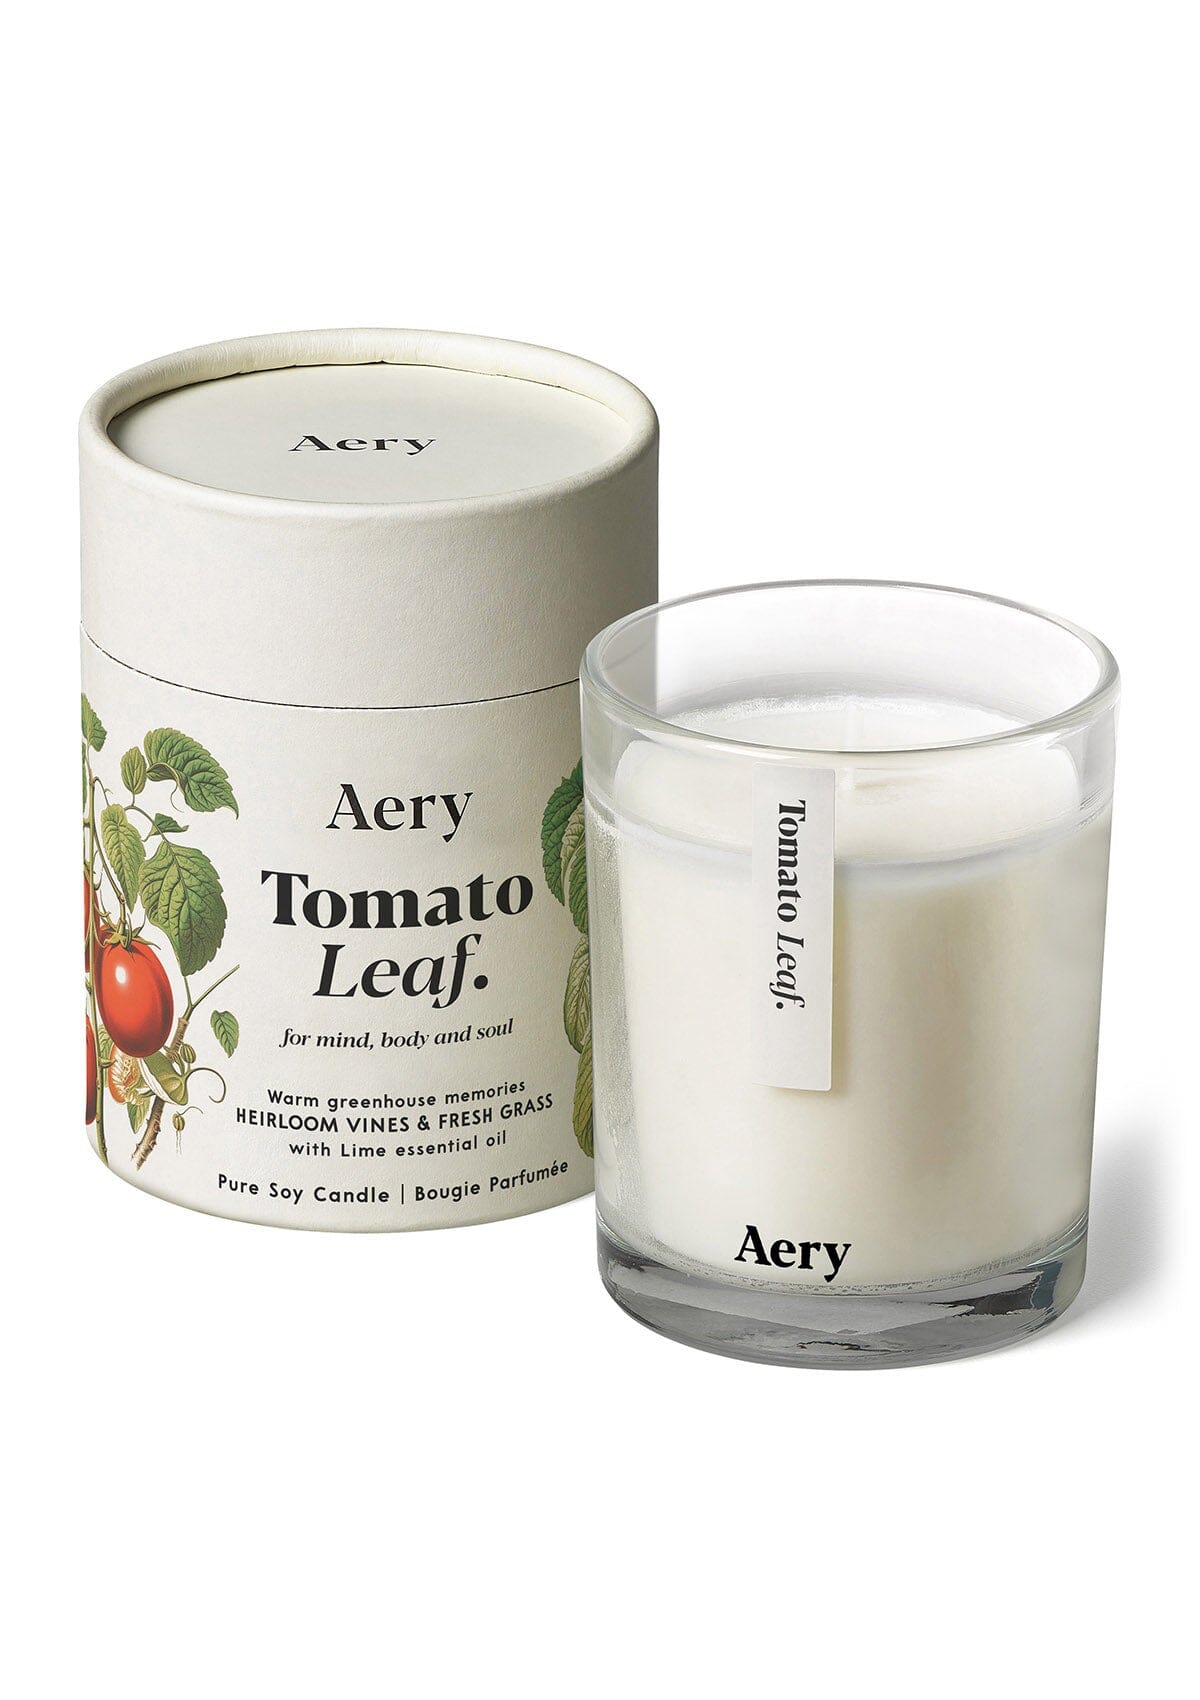 Tomato Leaf Cream candle displayed next to product packaging on white background 